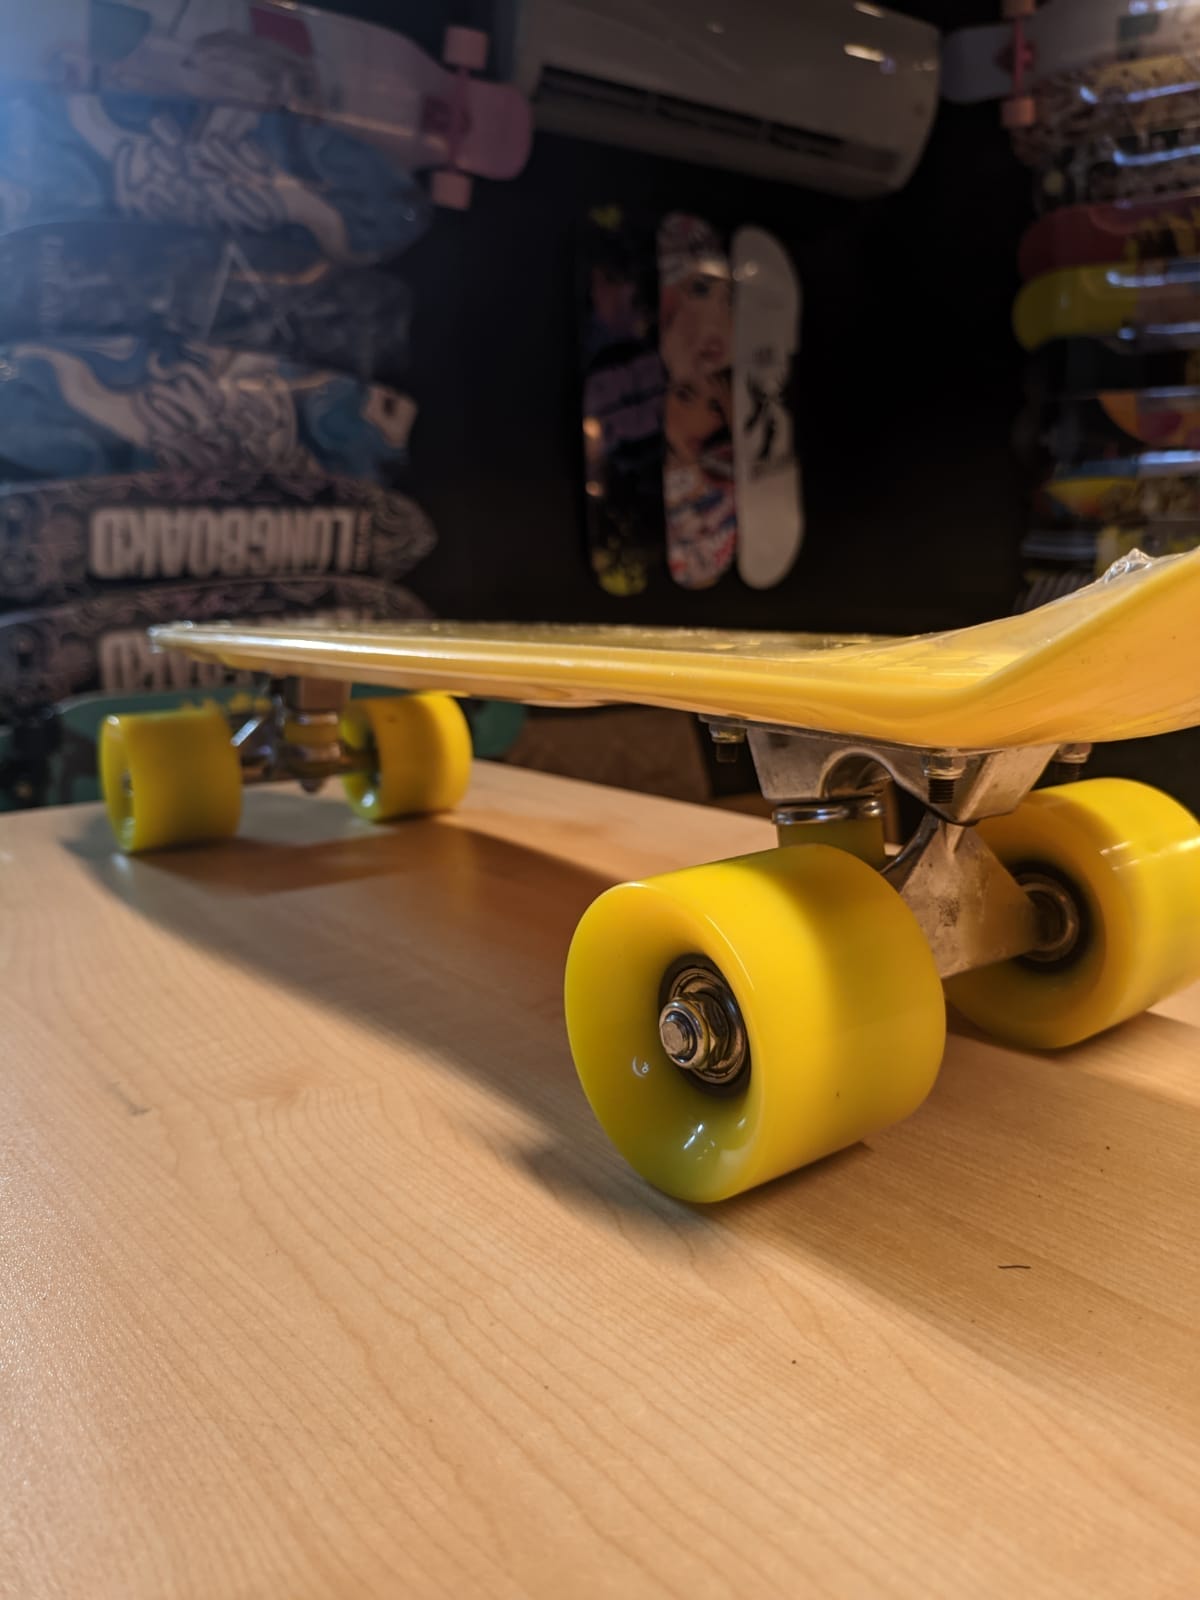 A board with a deck shaped like a surfboard is called a cruiser.